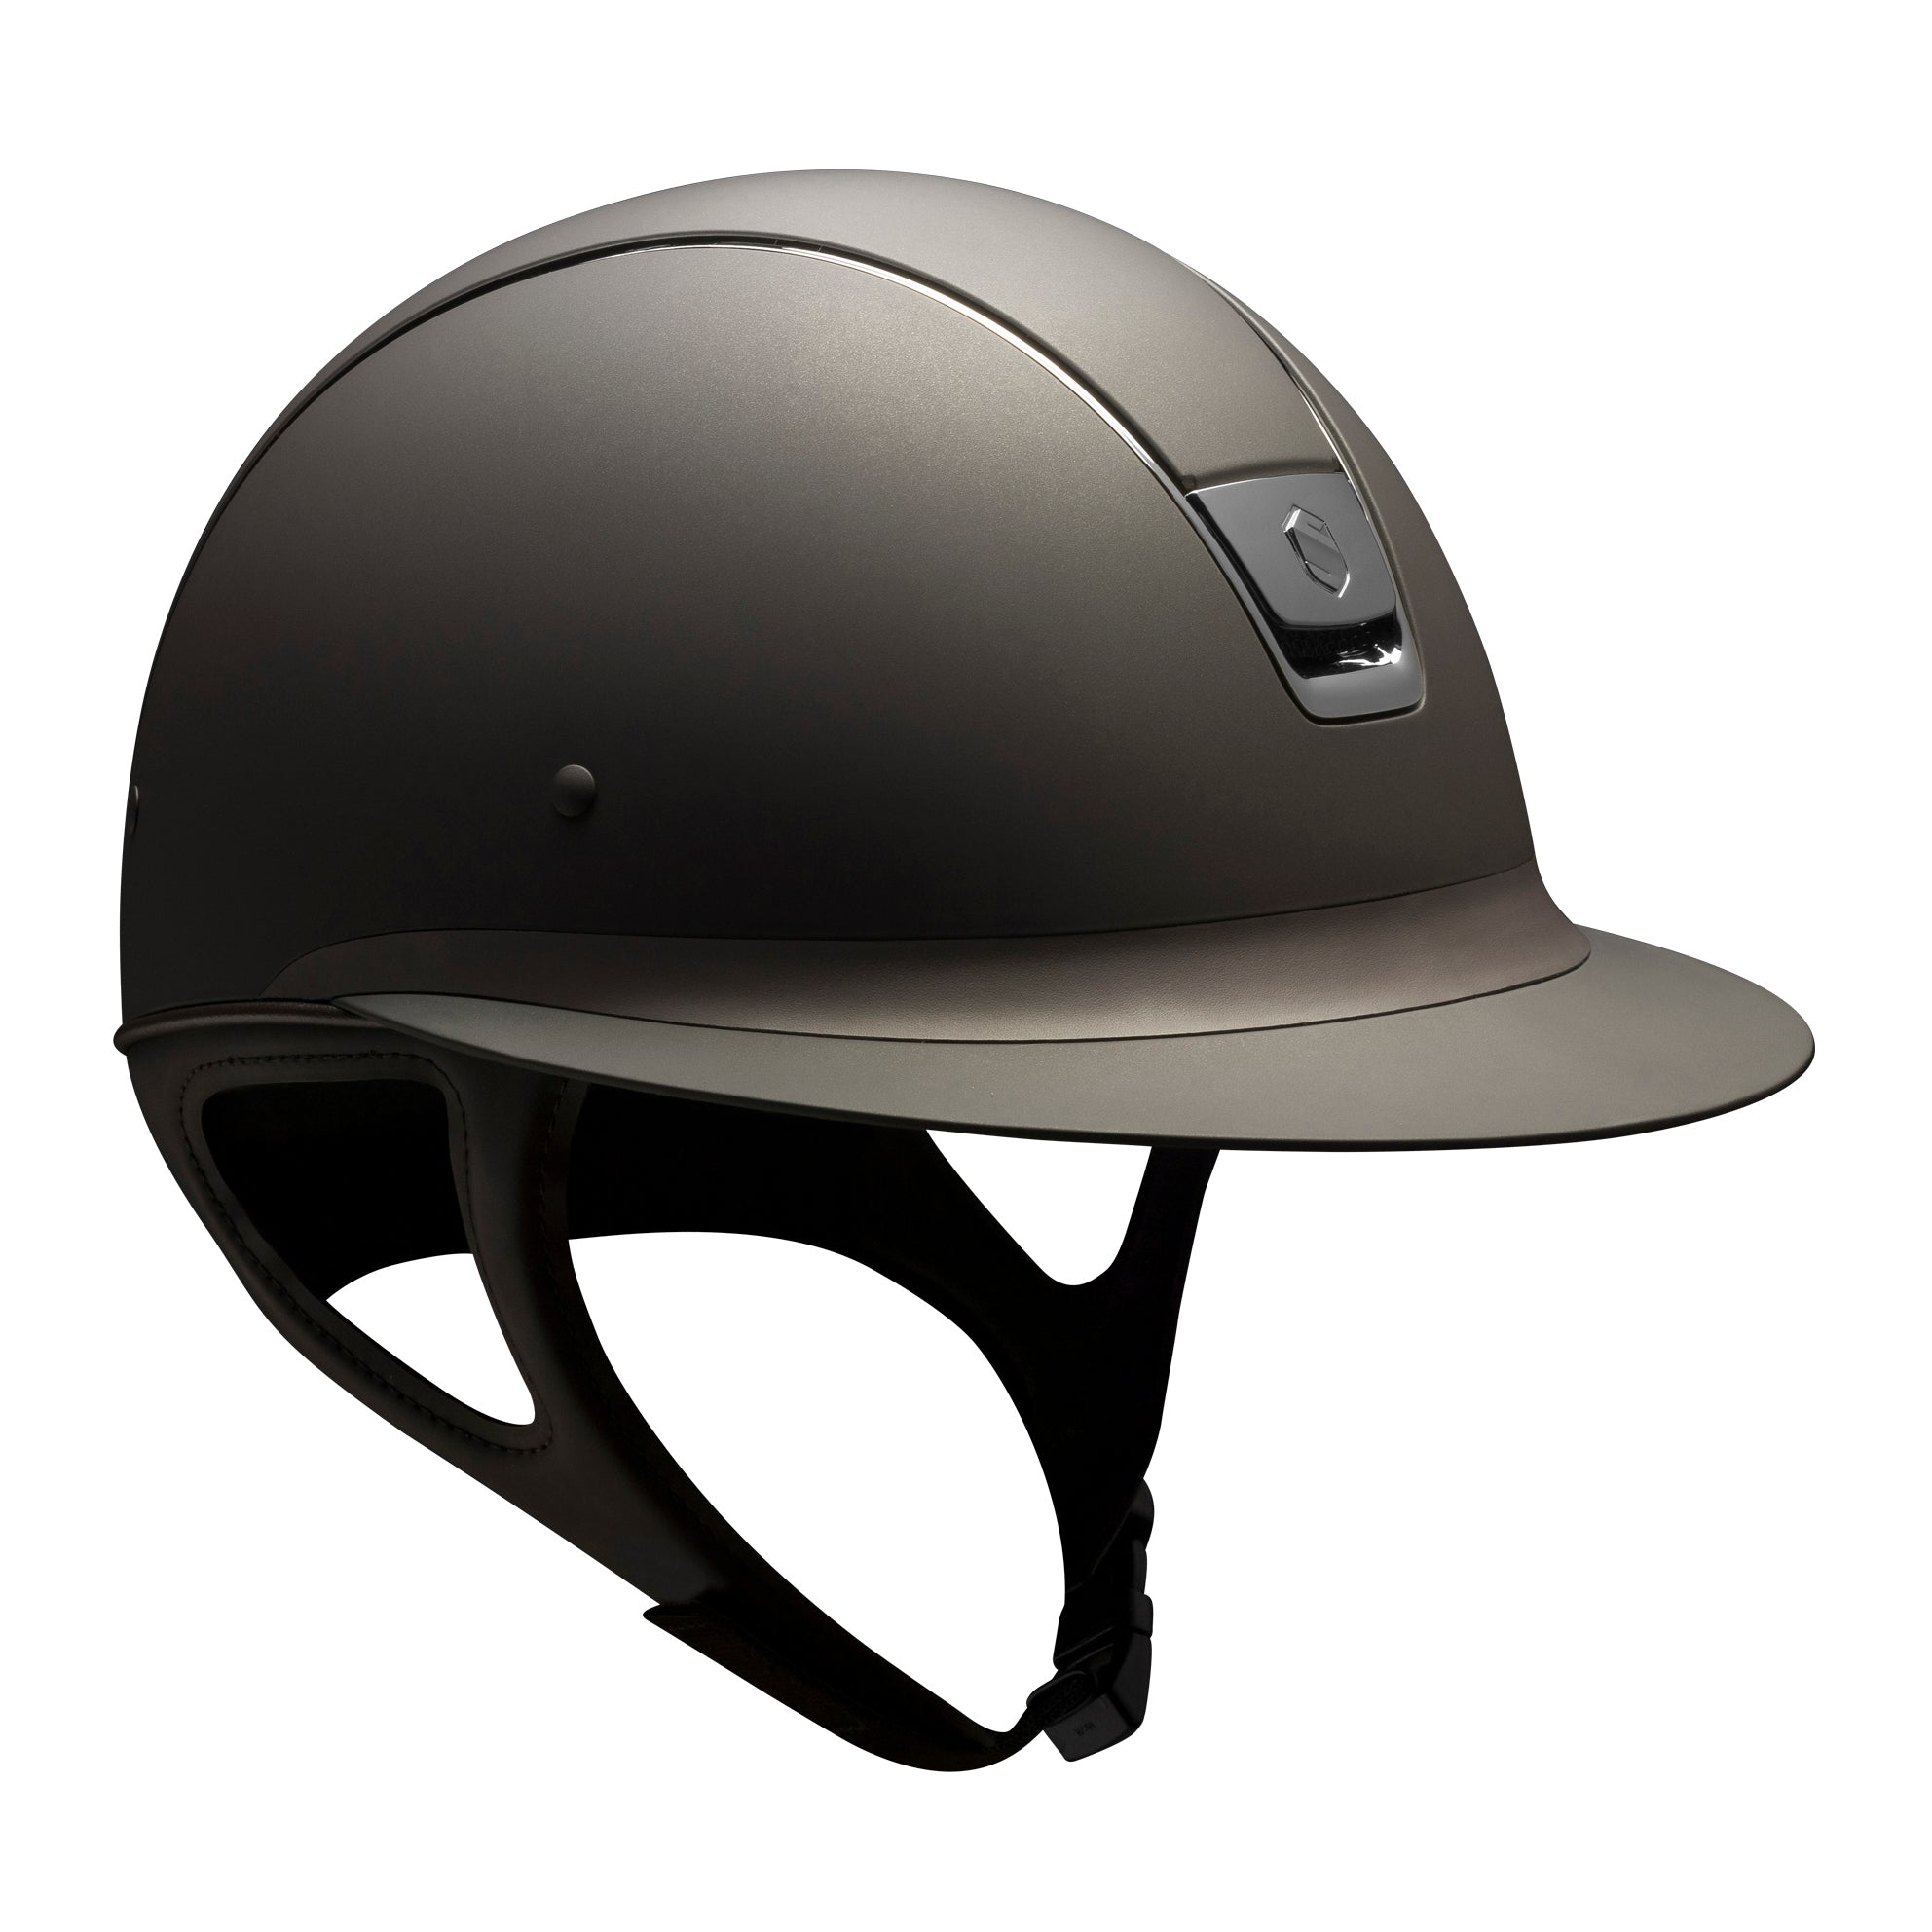 Samshield 1.0 Miss Shield Helmet- in stock and ready to ship